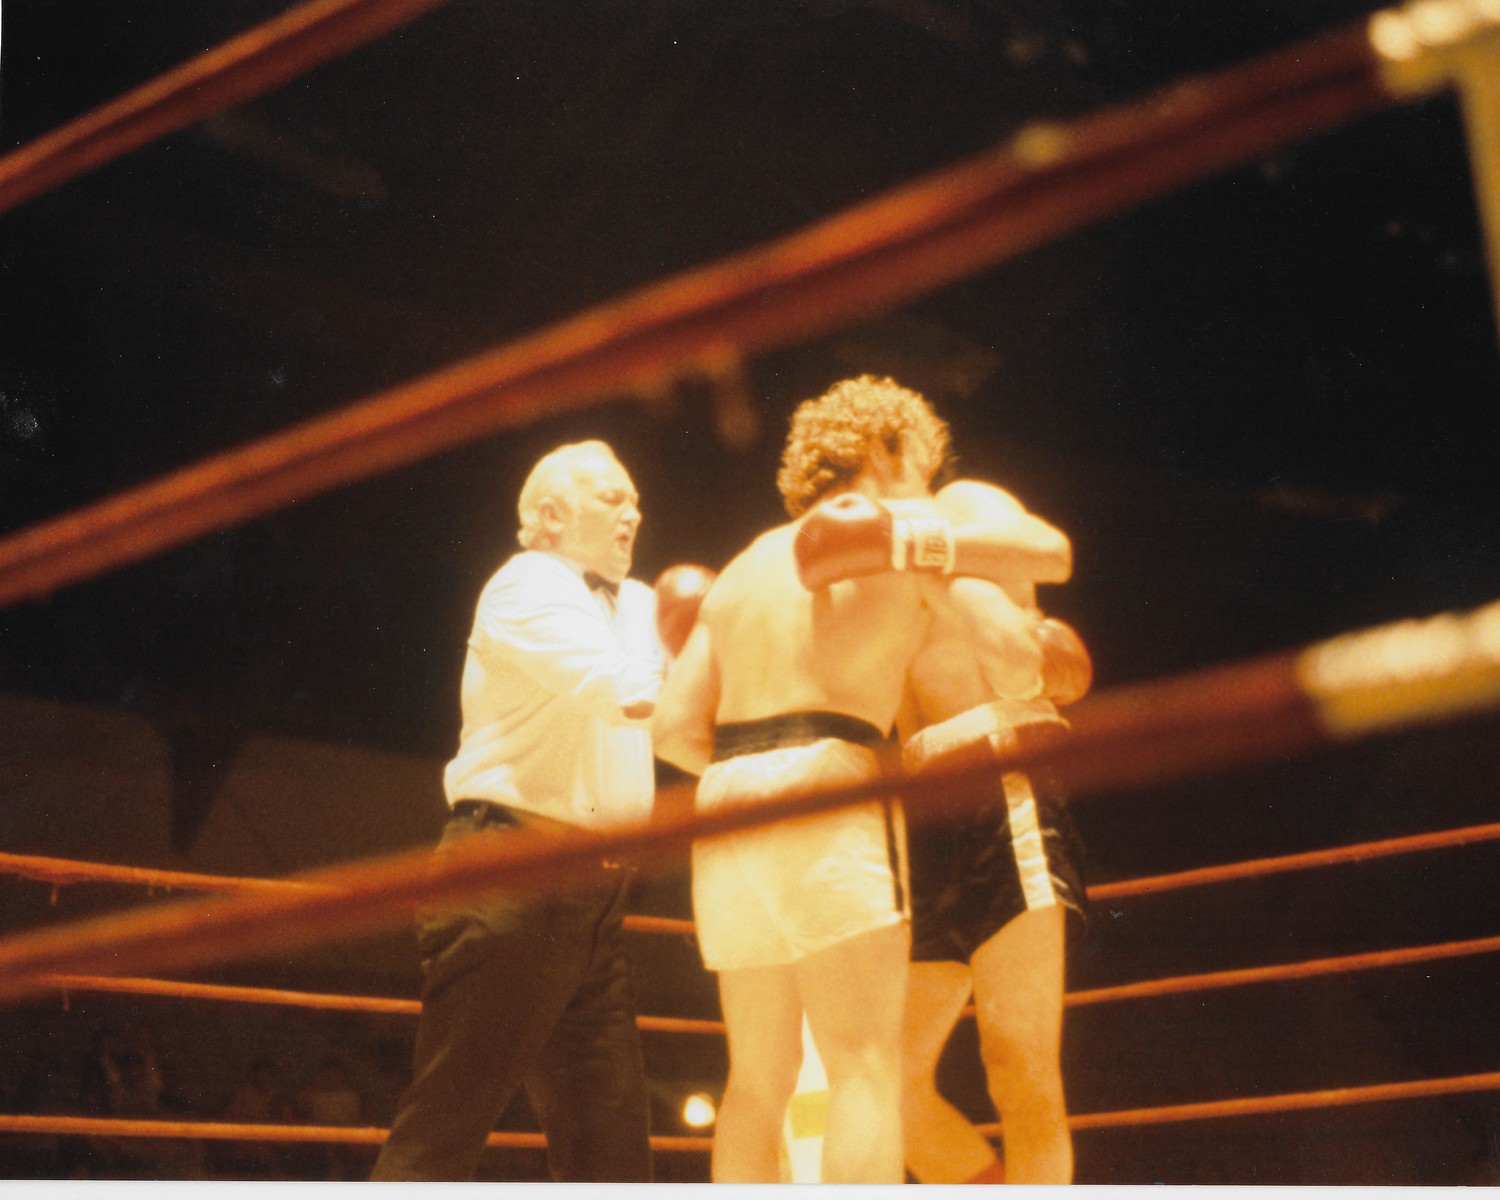 While living in Wantagh, Norkus became a referee and judge for boxing matches around New York State.